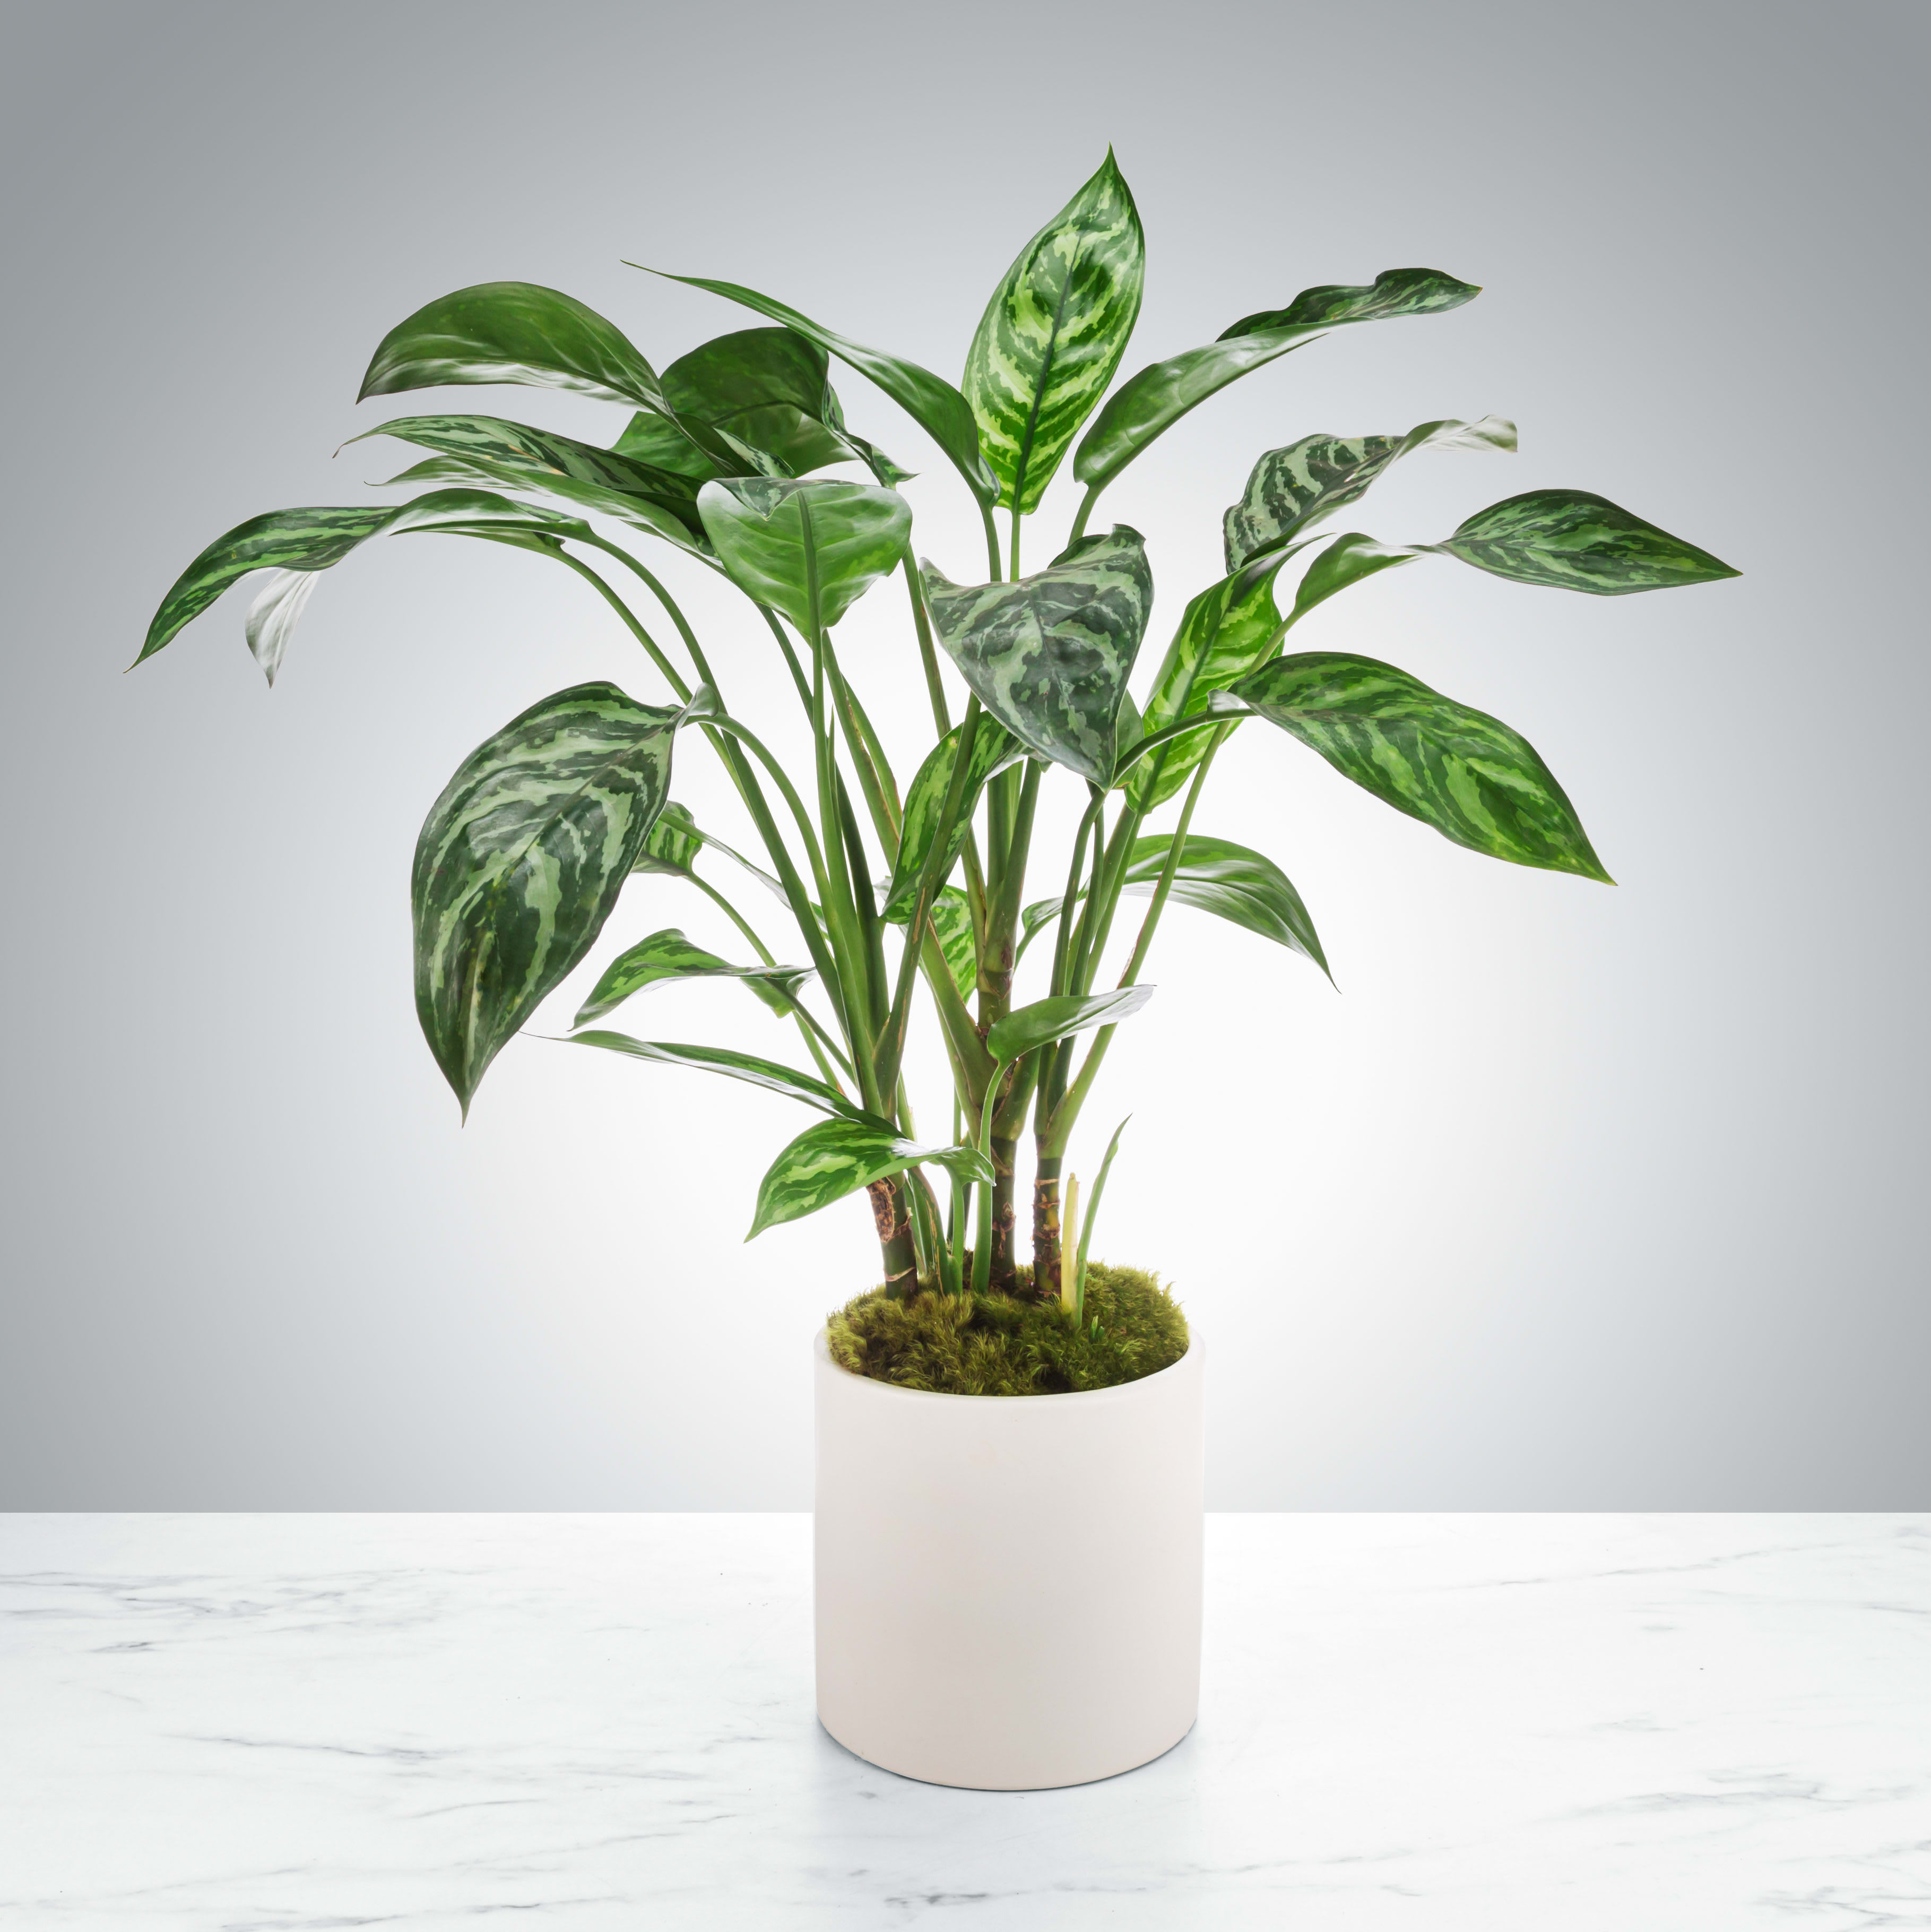 Dumb Cane Plant by BloomNation™ - Dumb cane plants do well when you keep the top layer of soil wet, but be careful to not overwater! They like filtered light and can improve any space aesthetically. Send one as a thank you gift for a job well done or as a congratulations award.